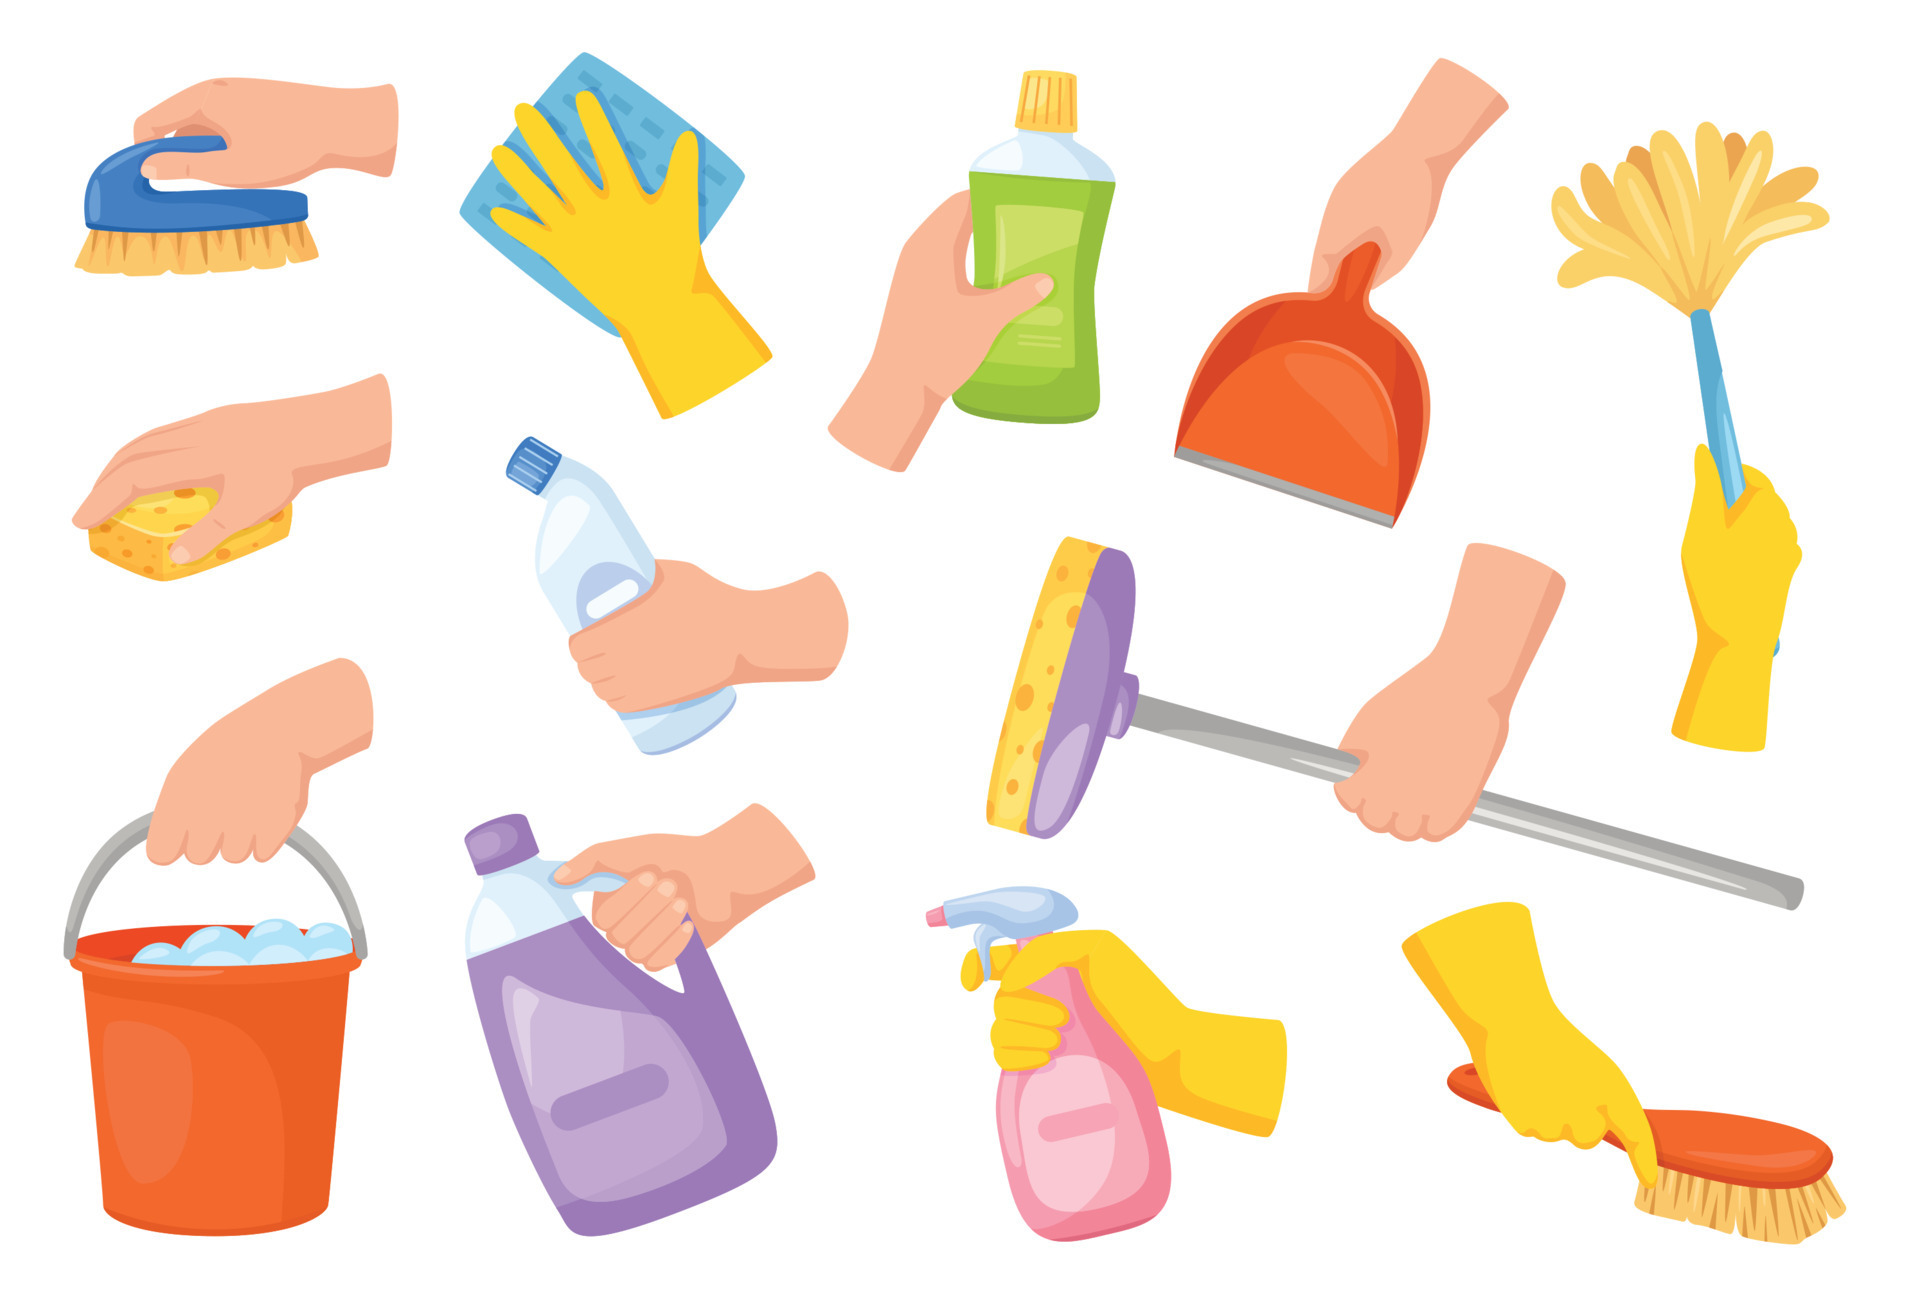 https://static.vecteezy.com/system/resources/previews/022/966/468/original/cleaning-tools-in-hands-hand-holding-housekeeping-equipment-broom-duster-detergent-scoop-cartoon-house-cleaning-supplies-set-vector.jpg